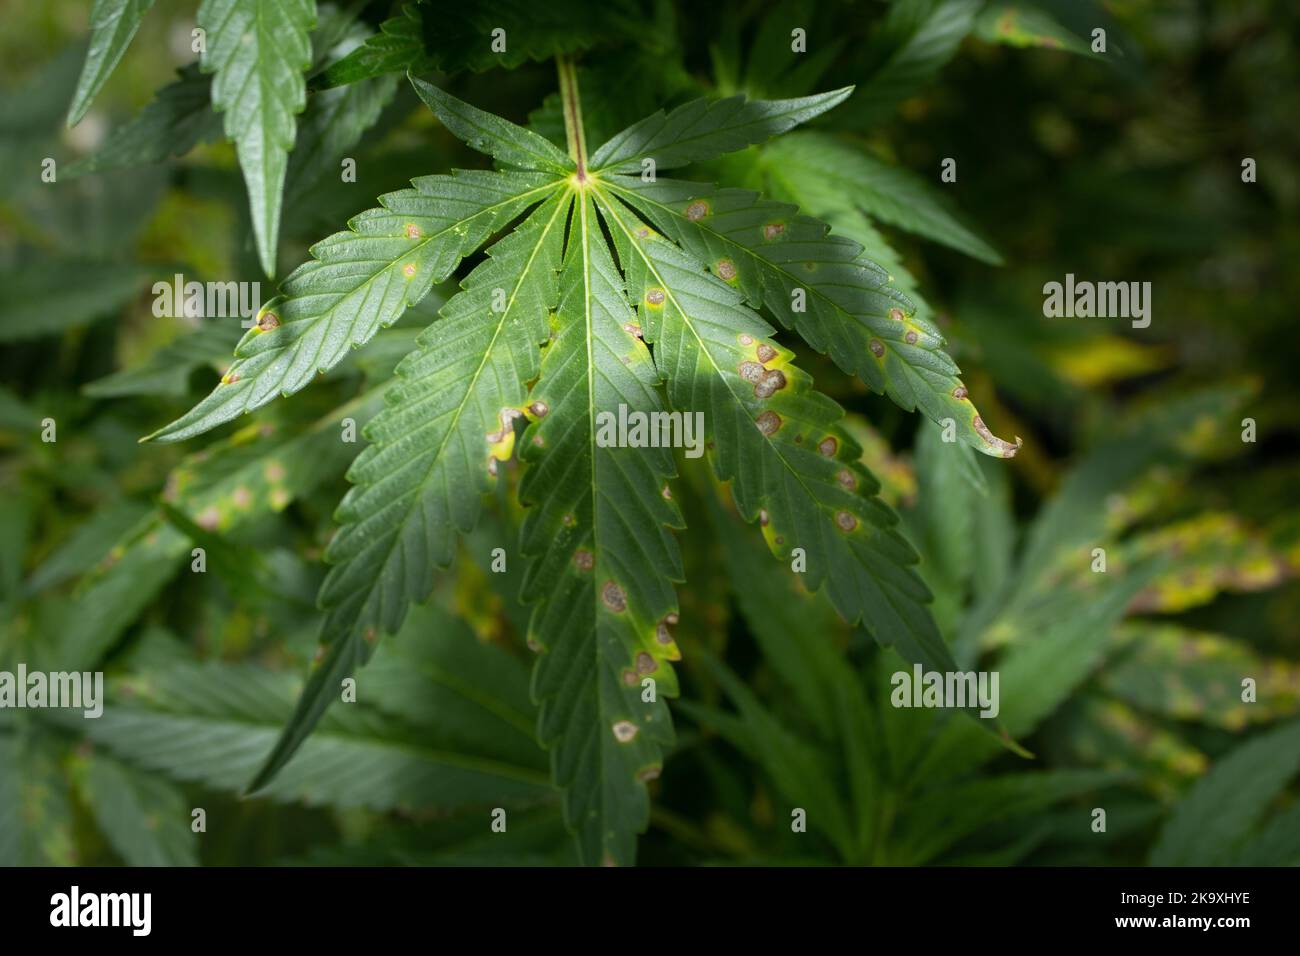 Marijuana plant showing signs of nutrient deficiency Stock Photo